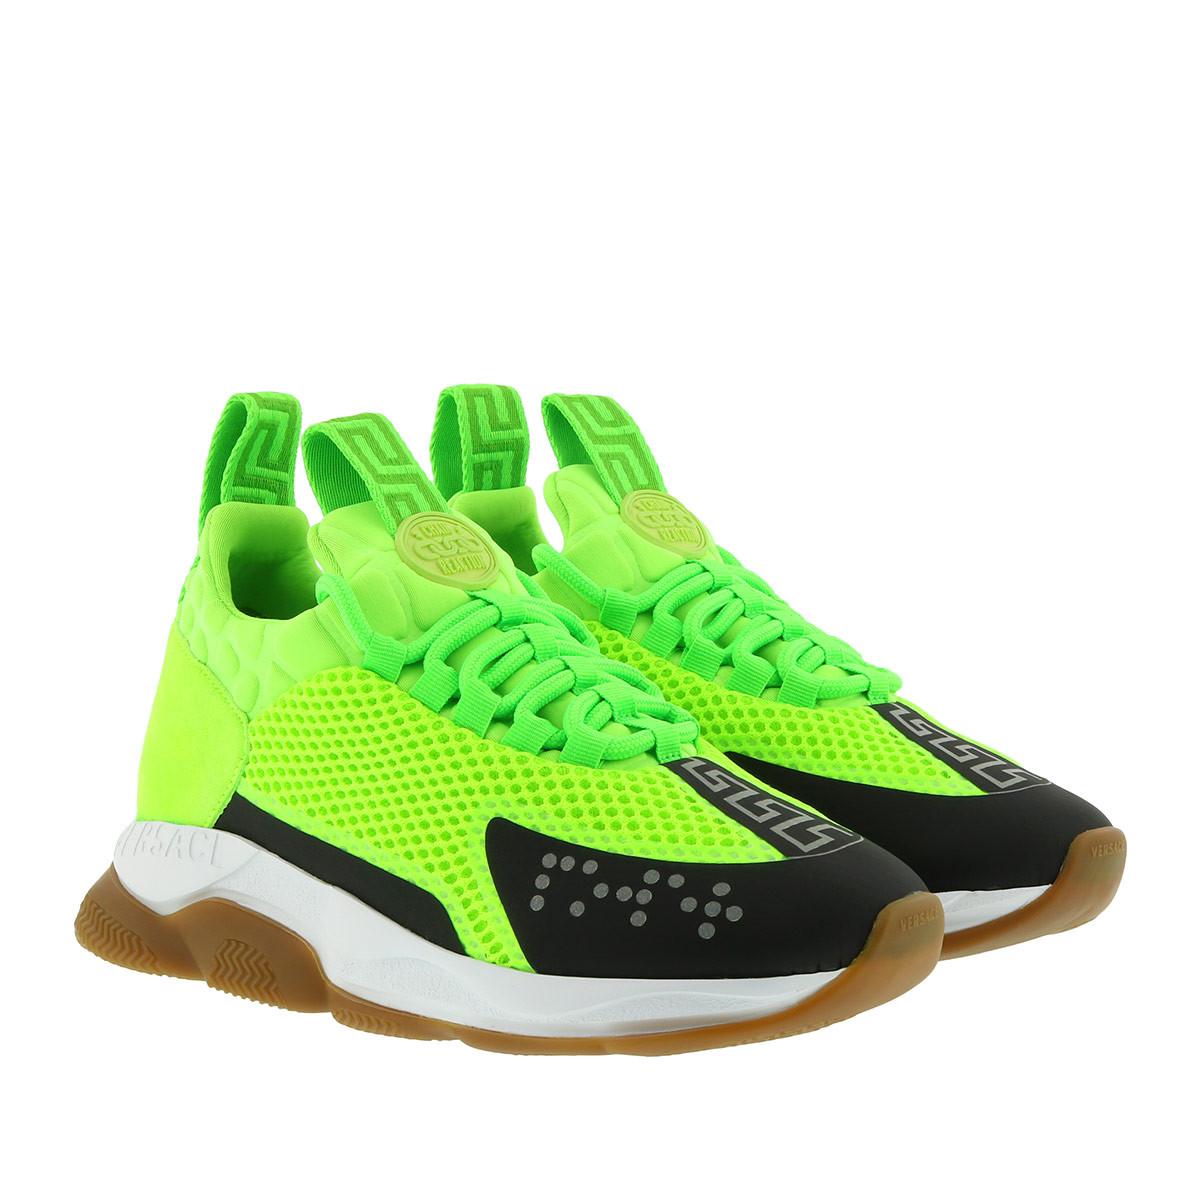 Versace Synthetic Cross Chainer Sneakers in Green - Lyst